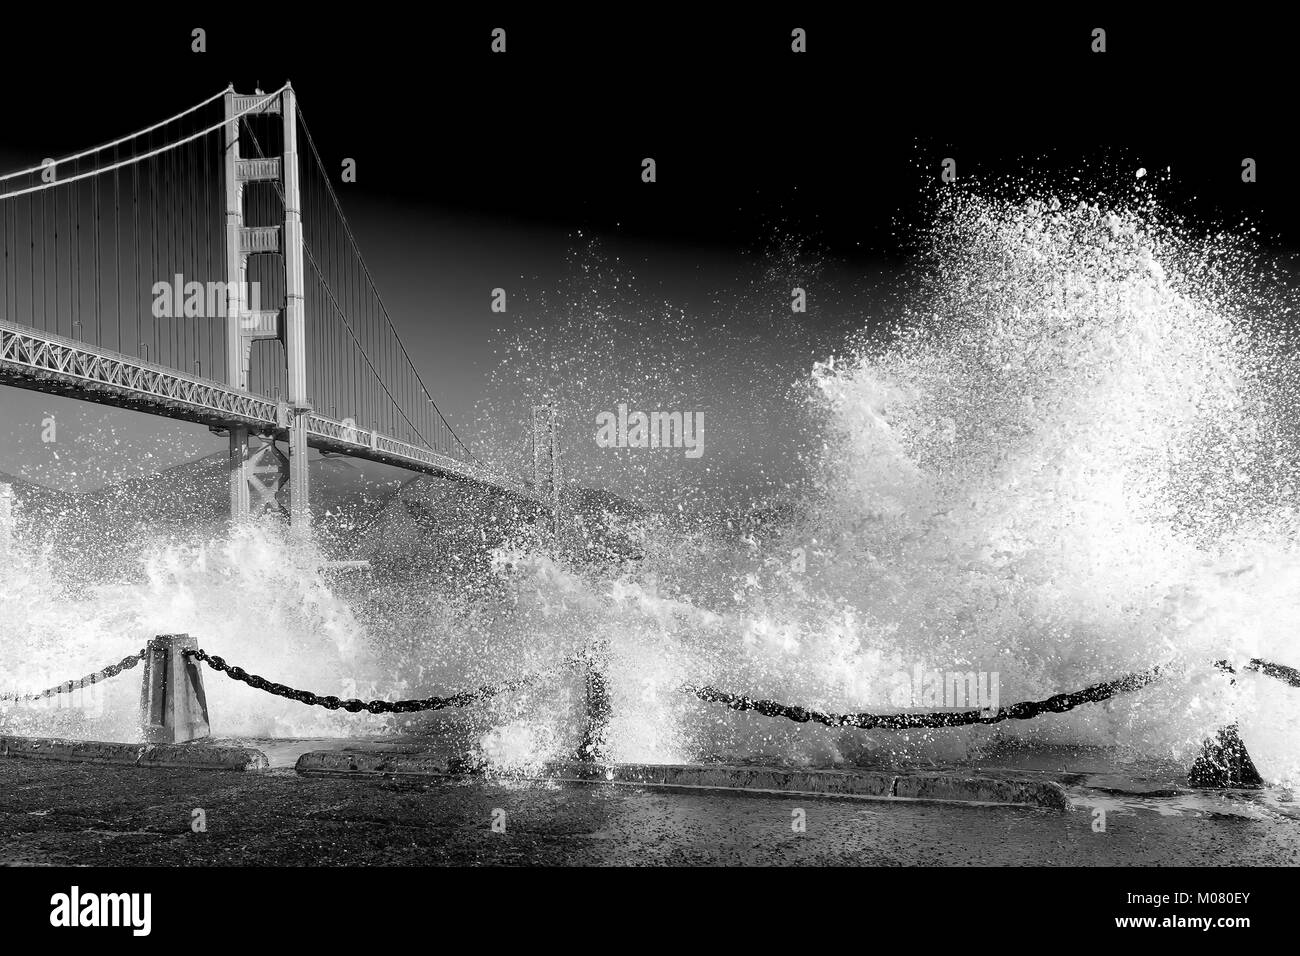 Golden Gate Bridge. Huge waves crash over the sea wall below the bridge in the foreground . Black and white monochrome with dark sky. Copy Space. Stock Photo